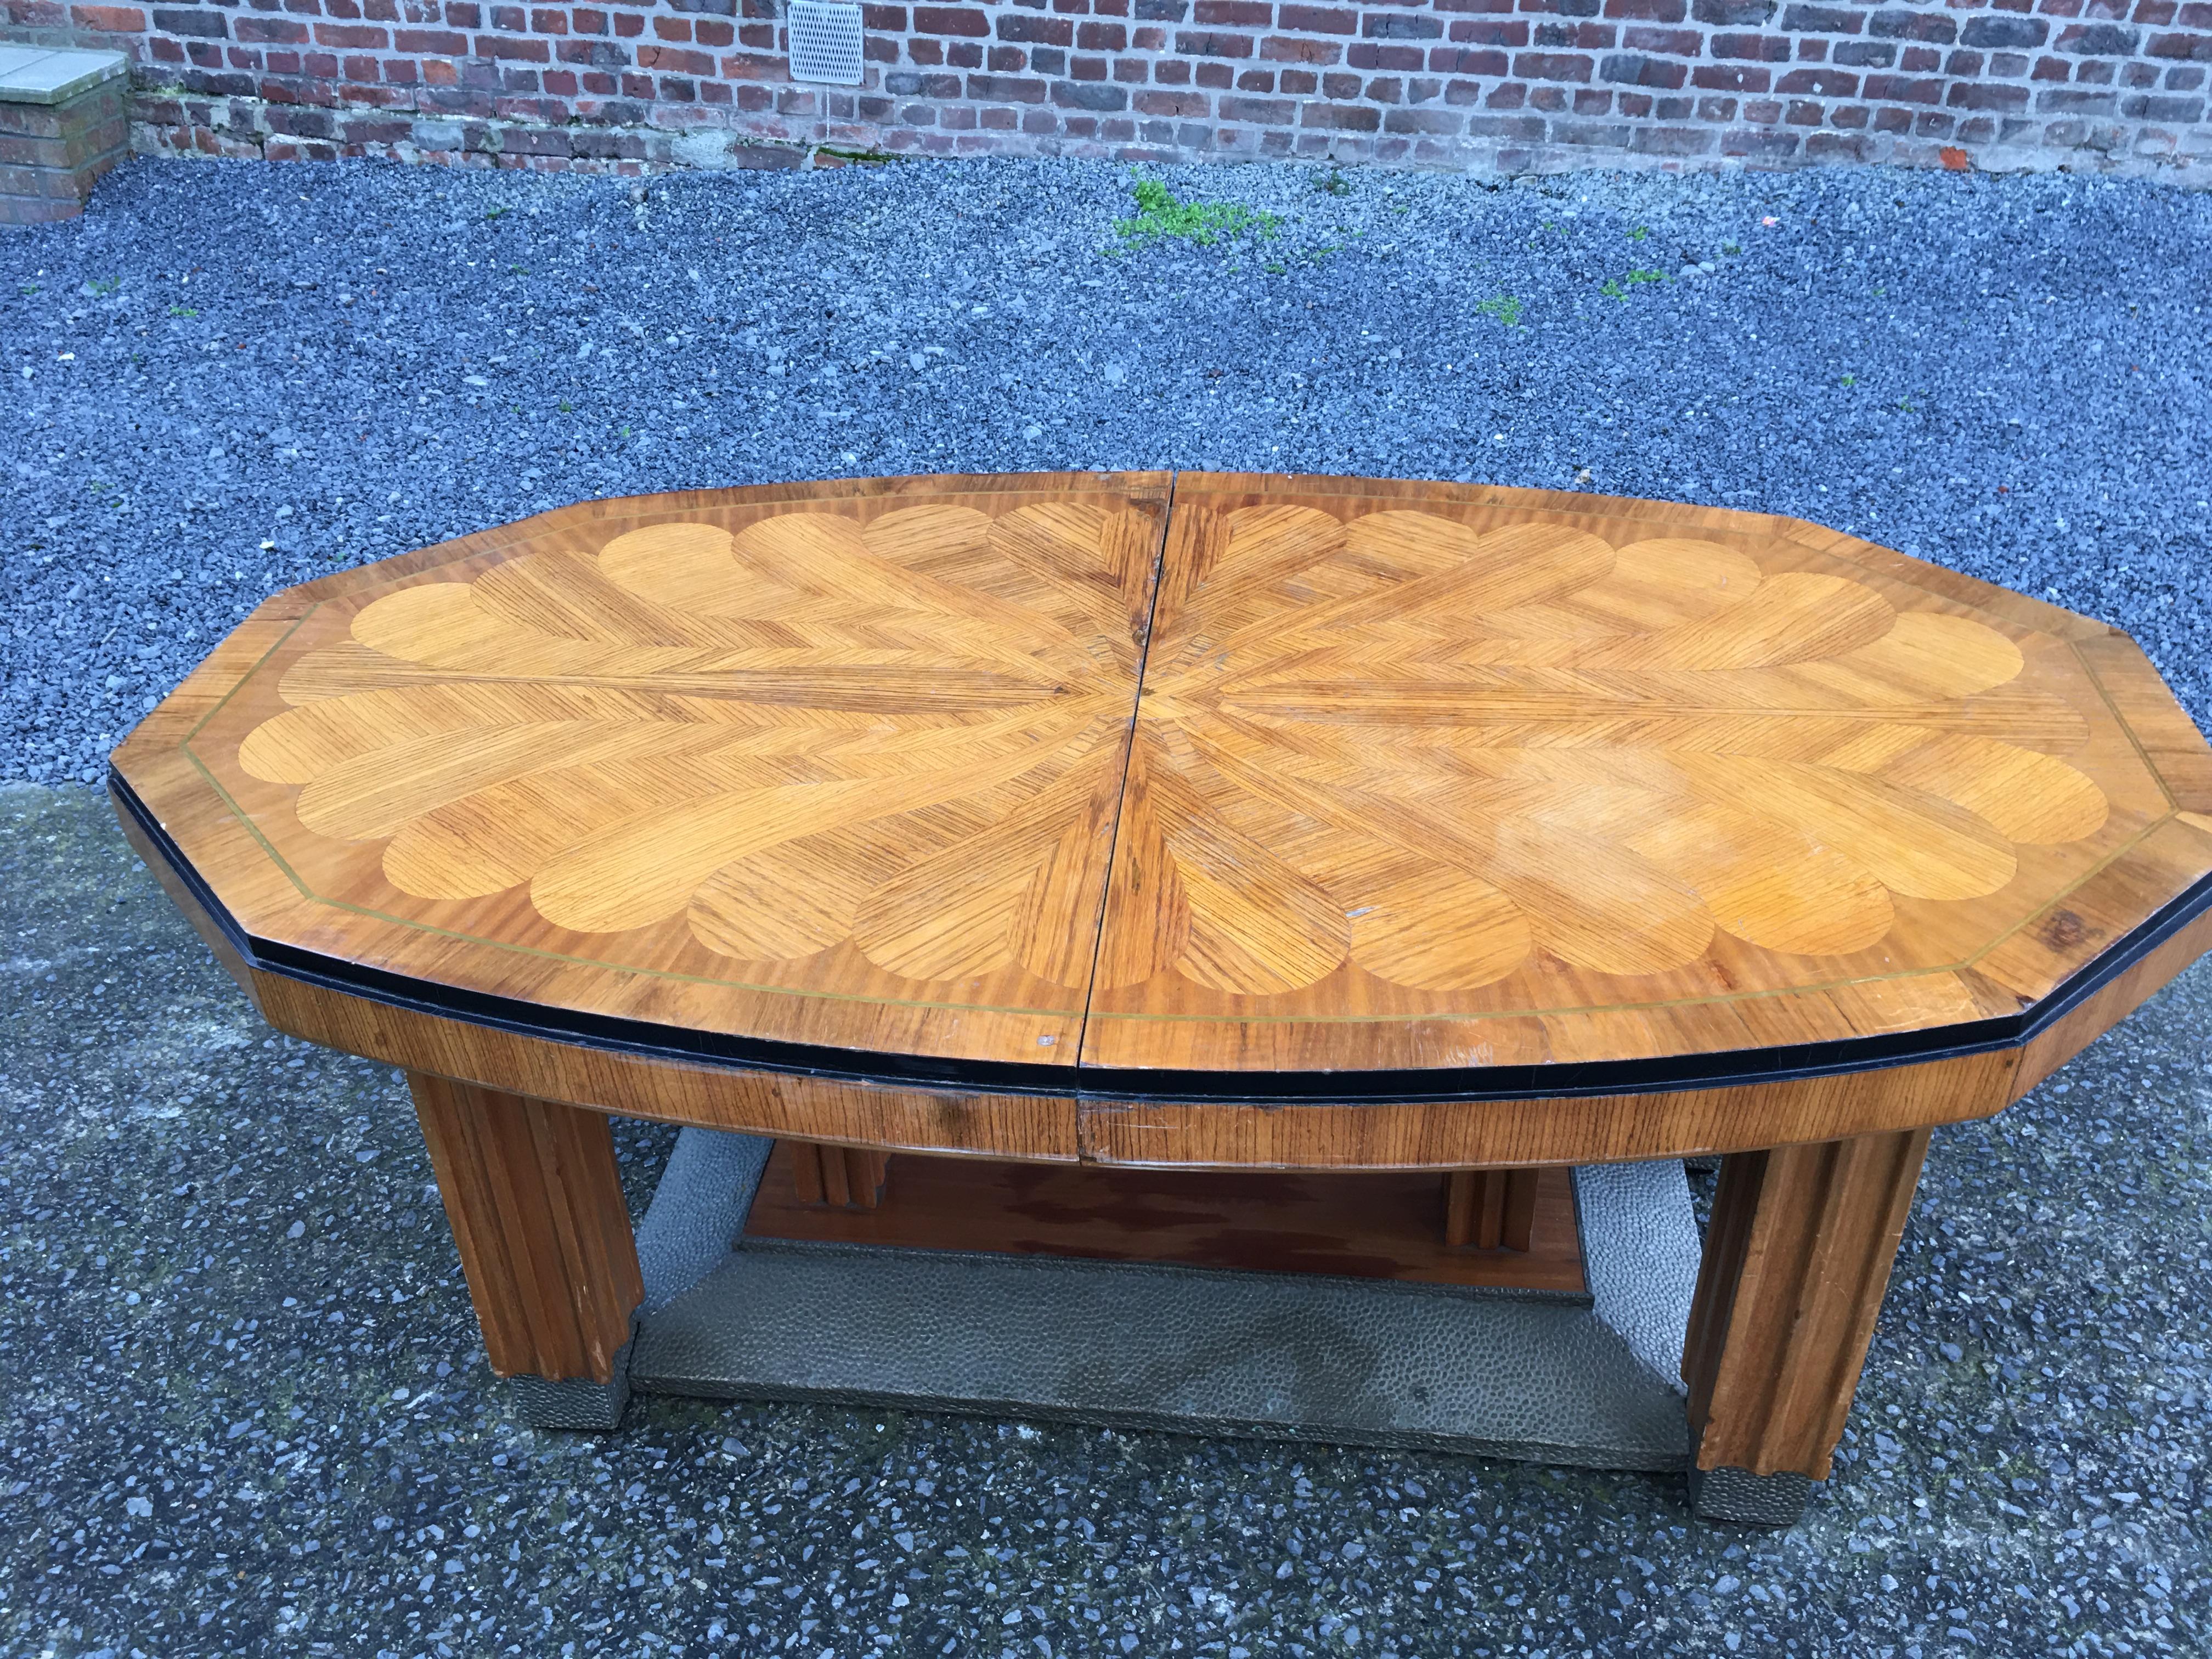 Large Art Deco Dining Table with Marquetry Design on the Top, circa 1925-1930 For Sale 5